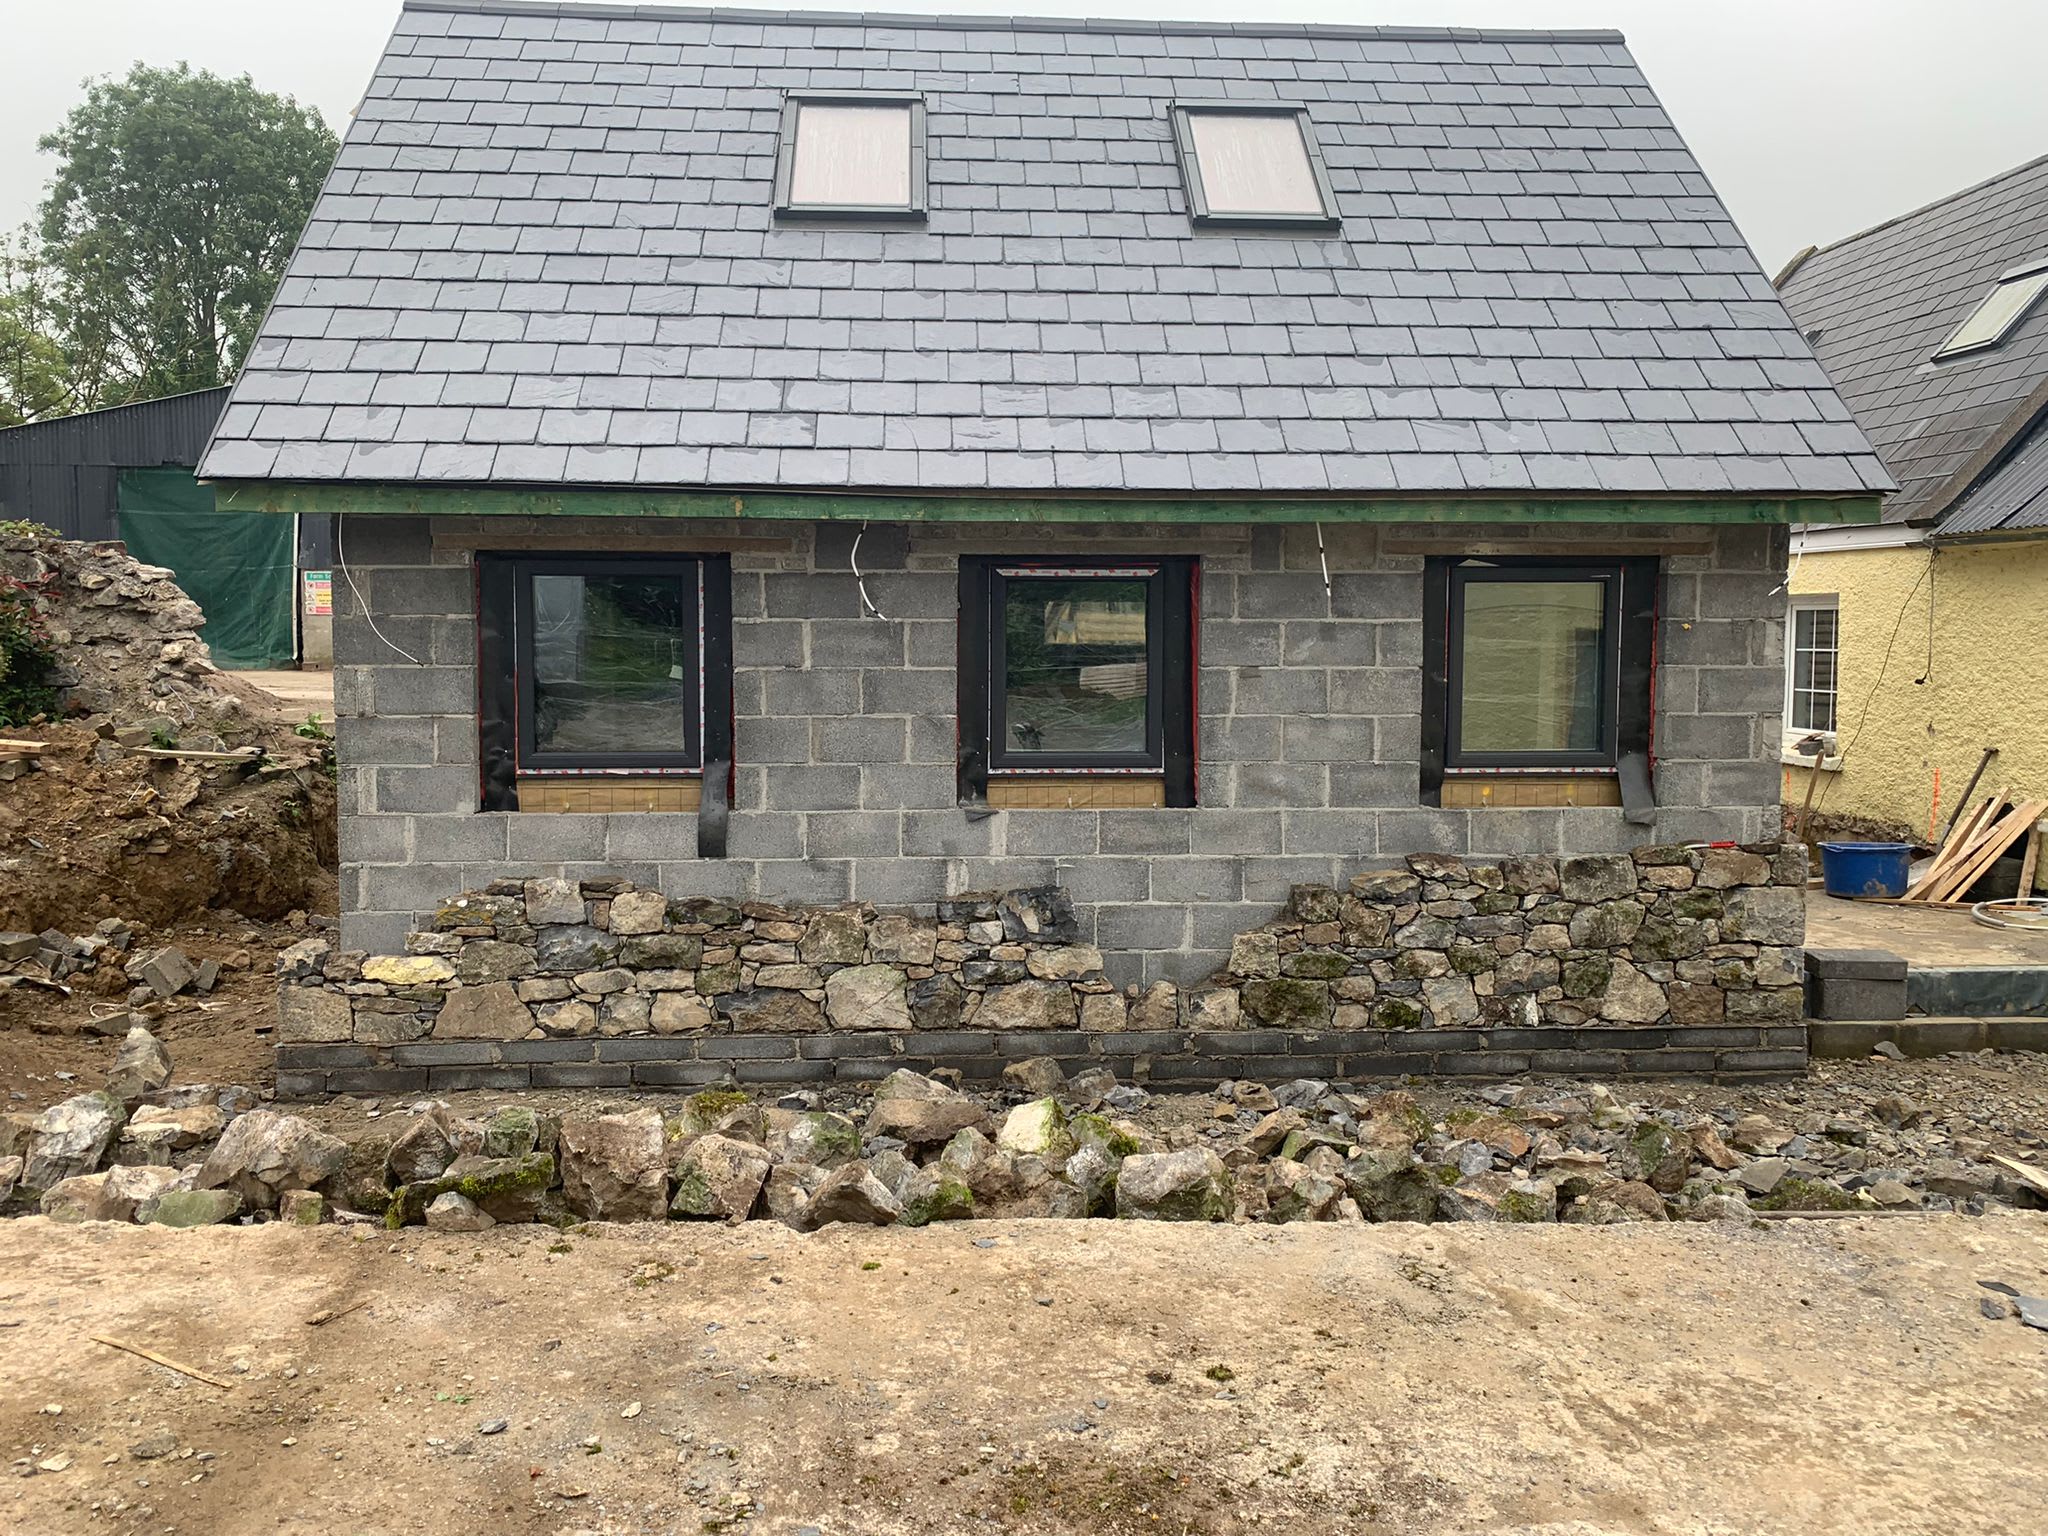 Timber Frame/Stone Clad Extension